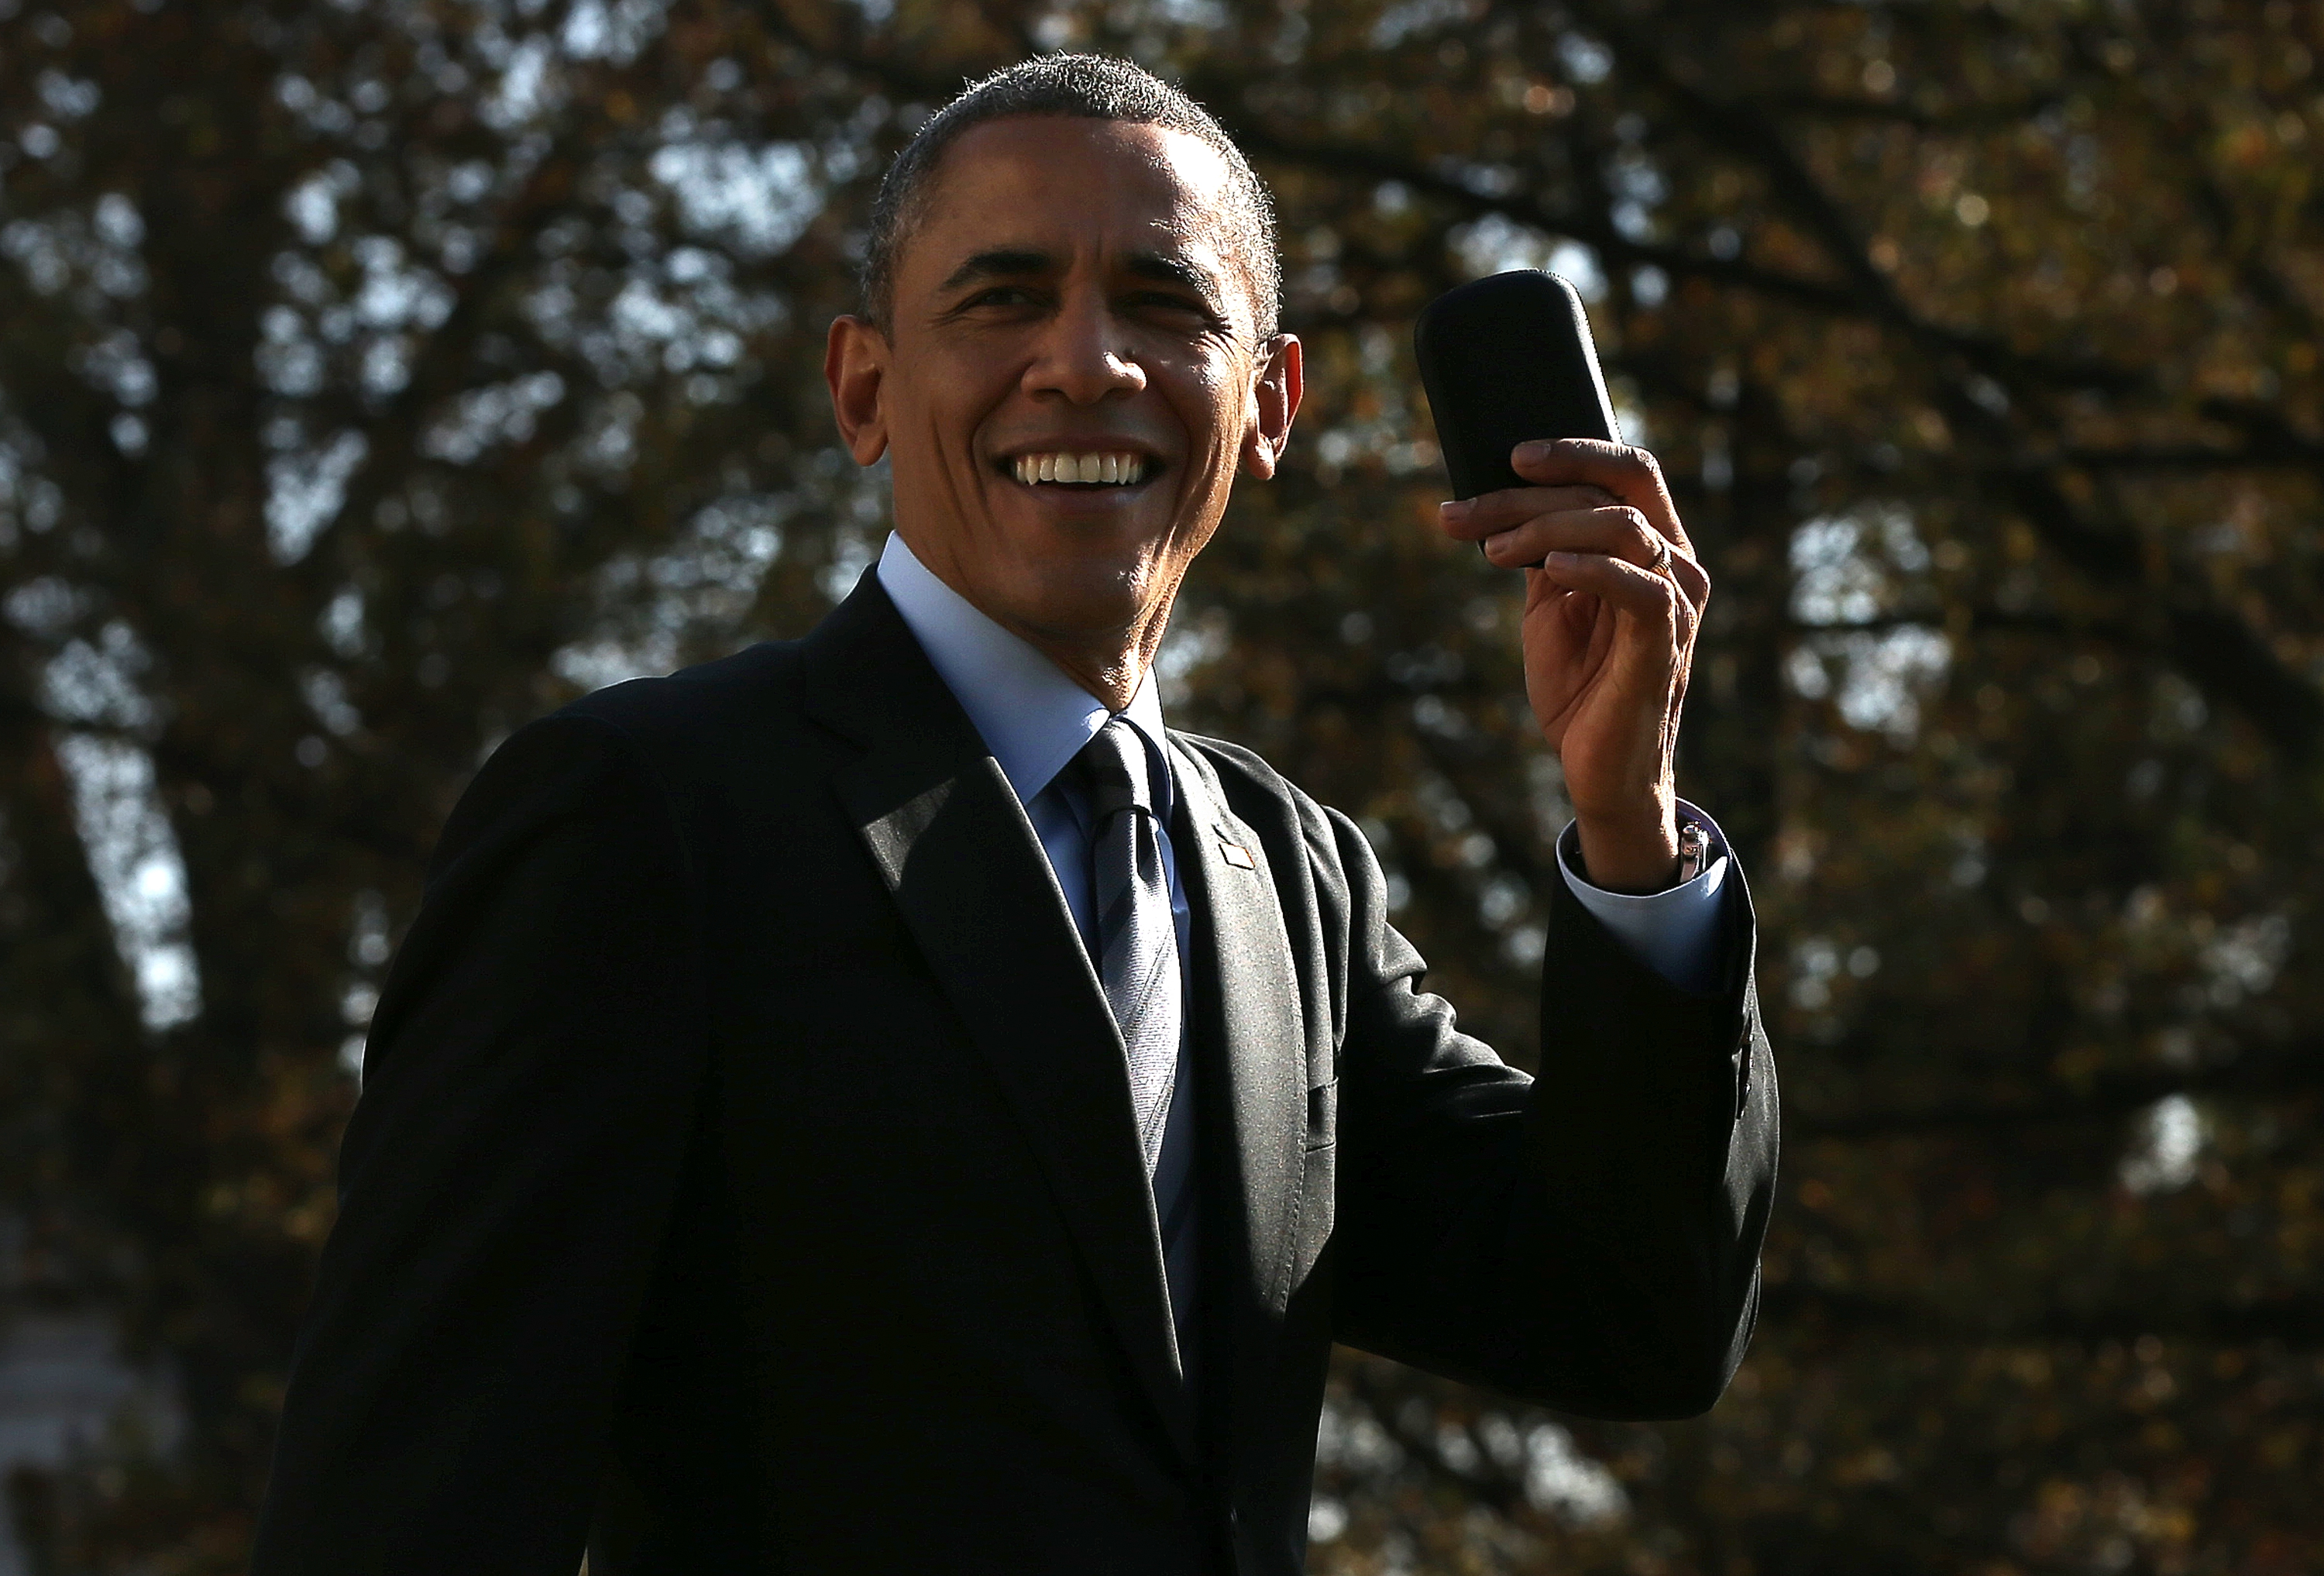 U.S. President Barack Obama holds up his Blackberry after he ran back into the White House after forgetting the mobile phone while departing for a domestic trip November 21, 2014 in Washington, DC. (Win McNamee&mdash;Getty Images)